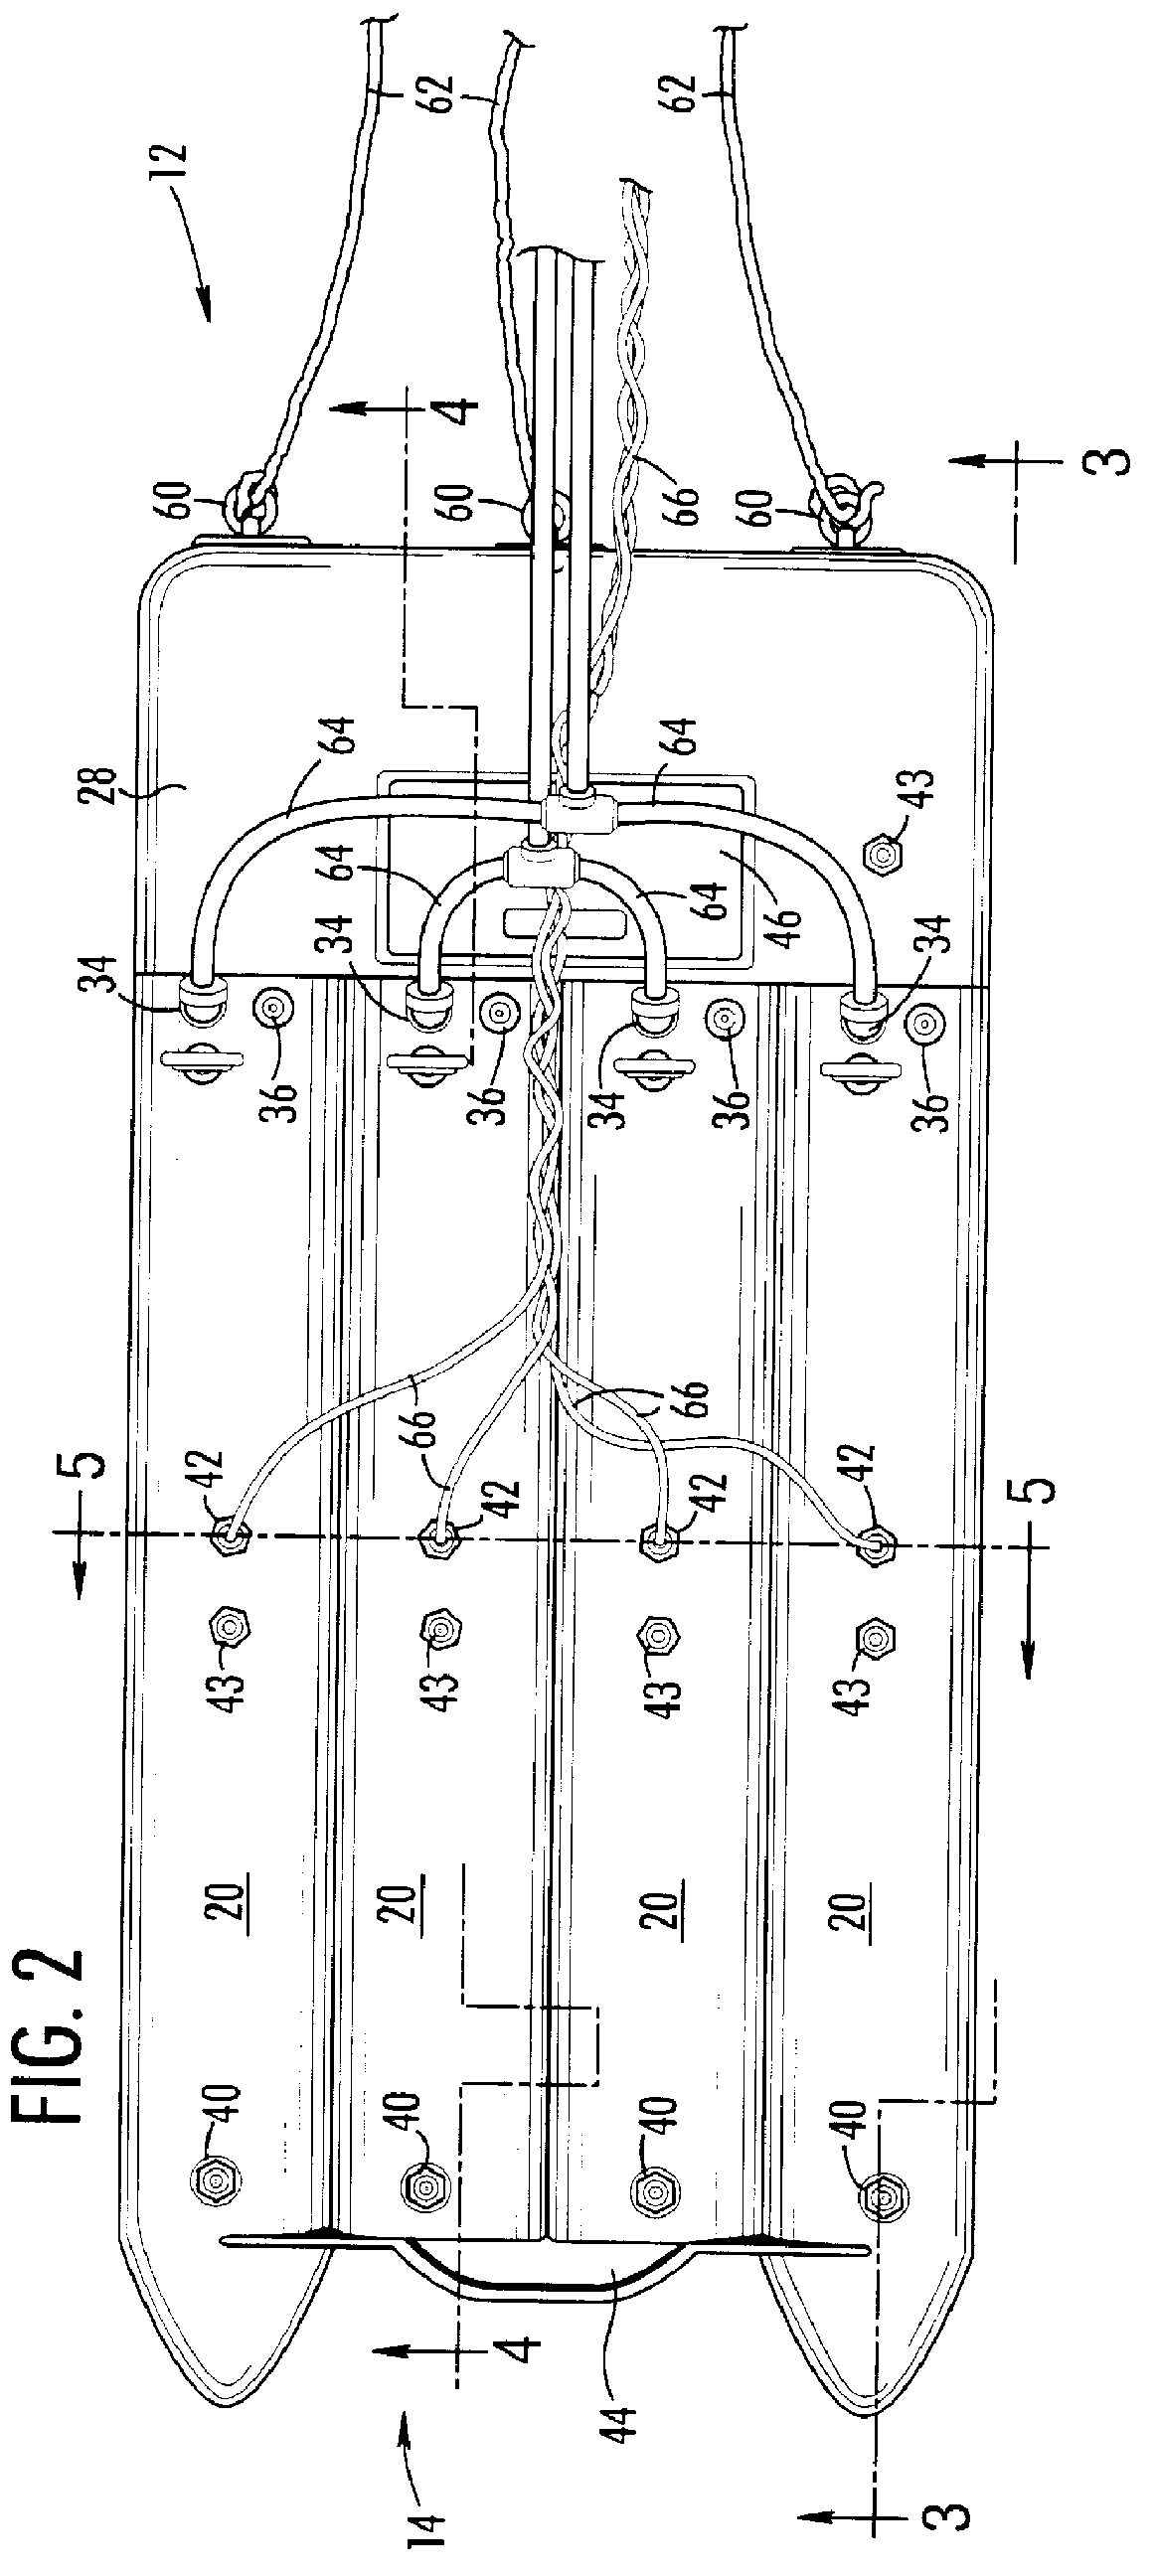 Floatable auxiliary fuel tank